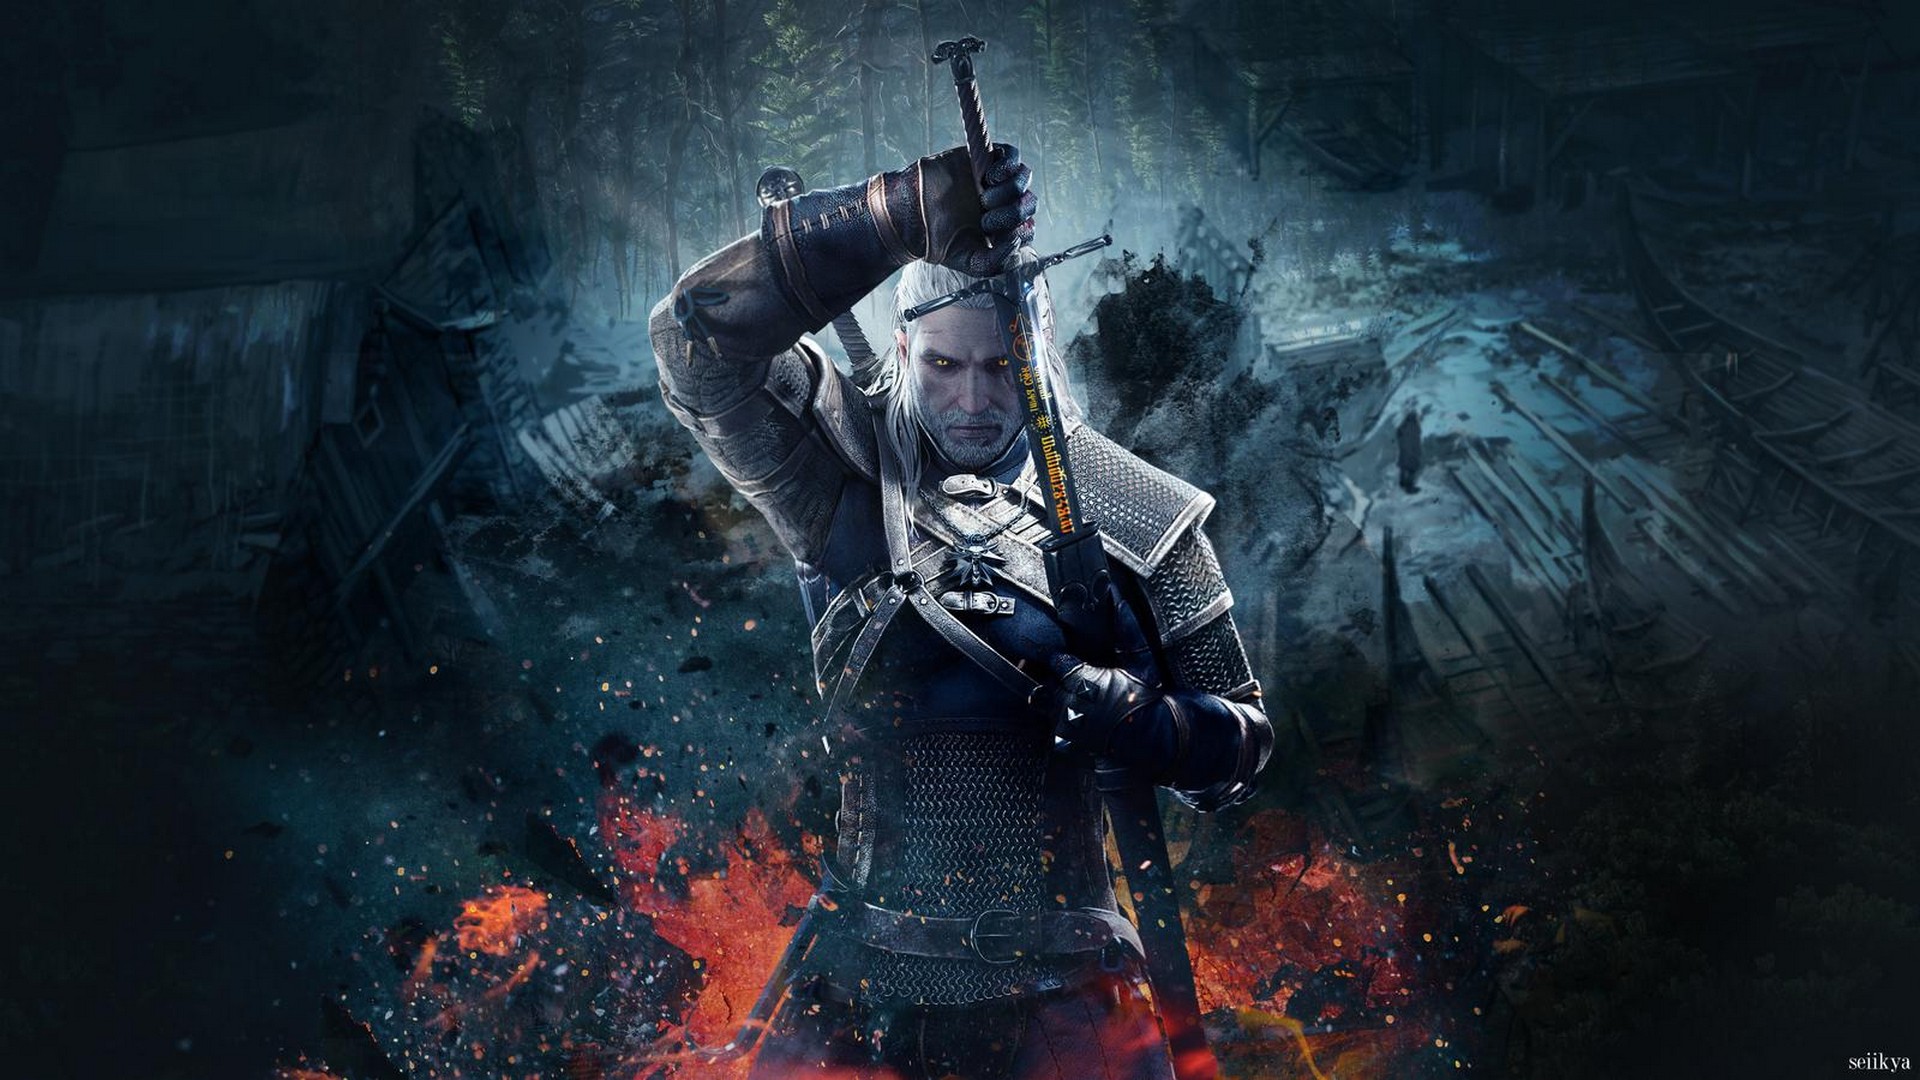 The Witcher Season 1 Wallpapers